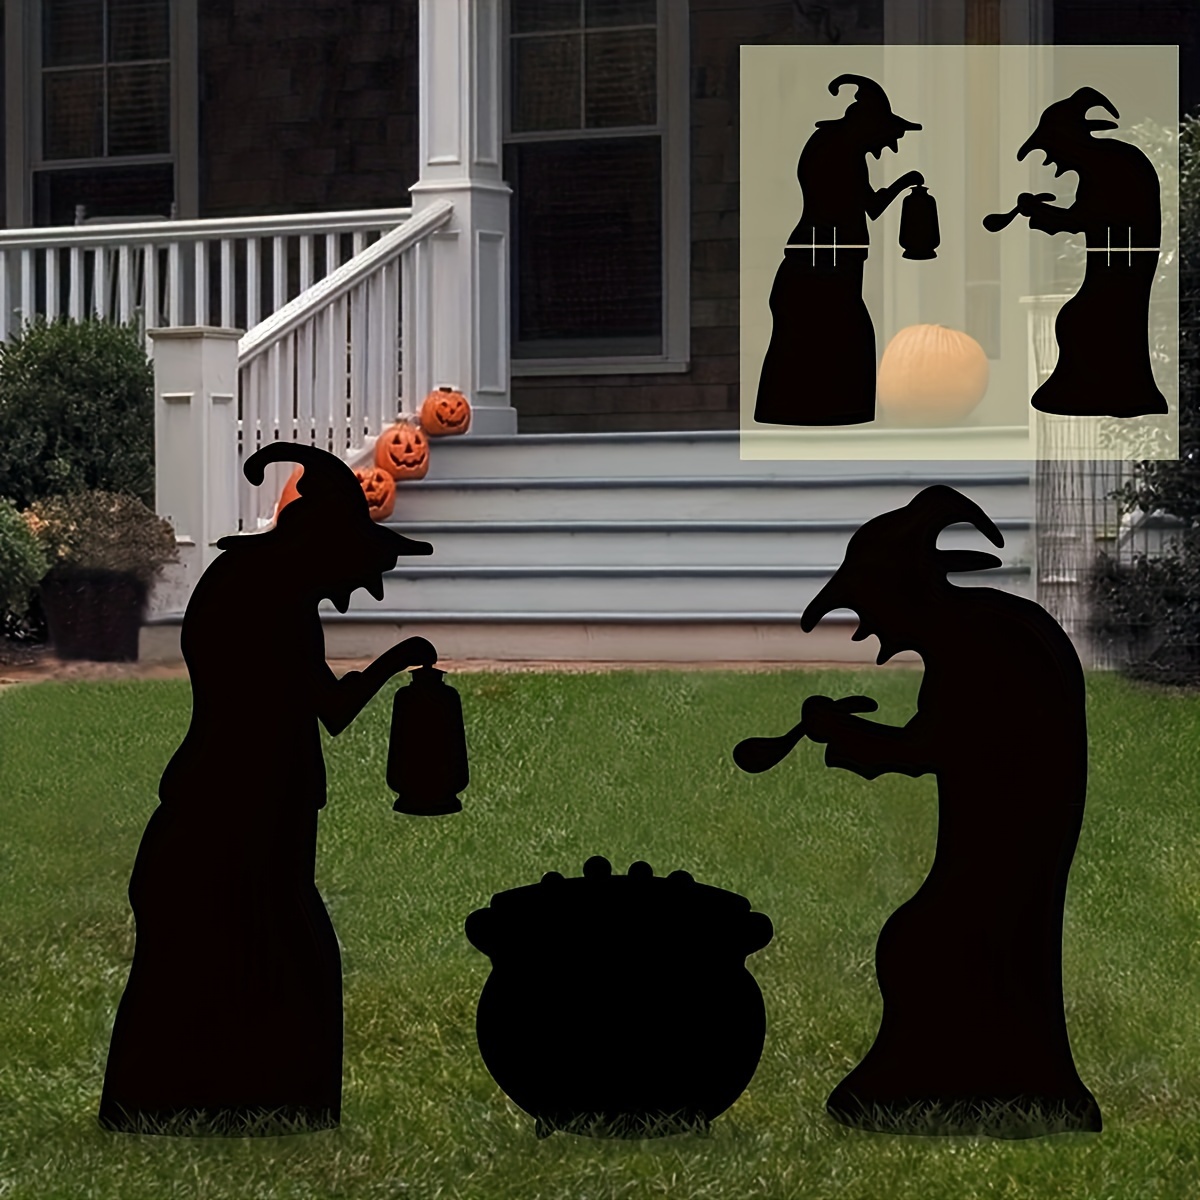 

3-piece Witch & Cauldron Halloween Yard Decor Set - Spooky Silhouette Garden Stakes, Waterproof Corrugated Plastic, Perfect For Family Gatherings